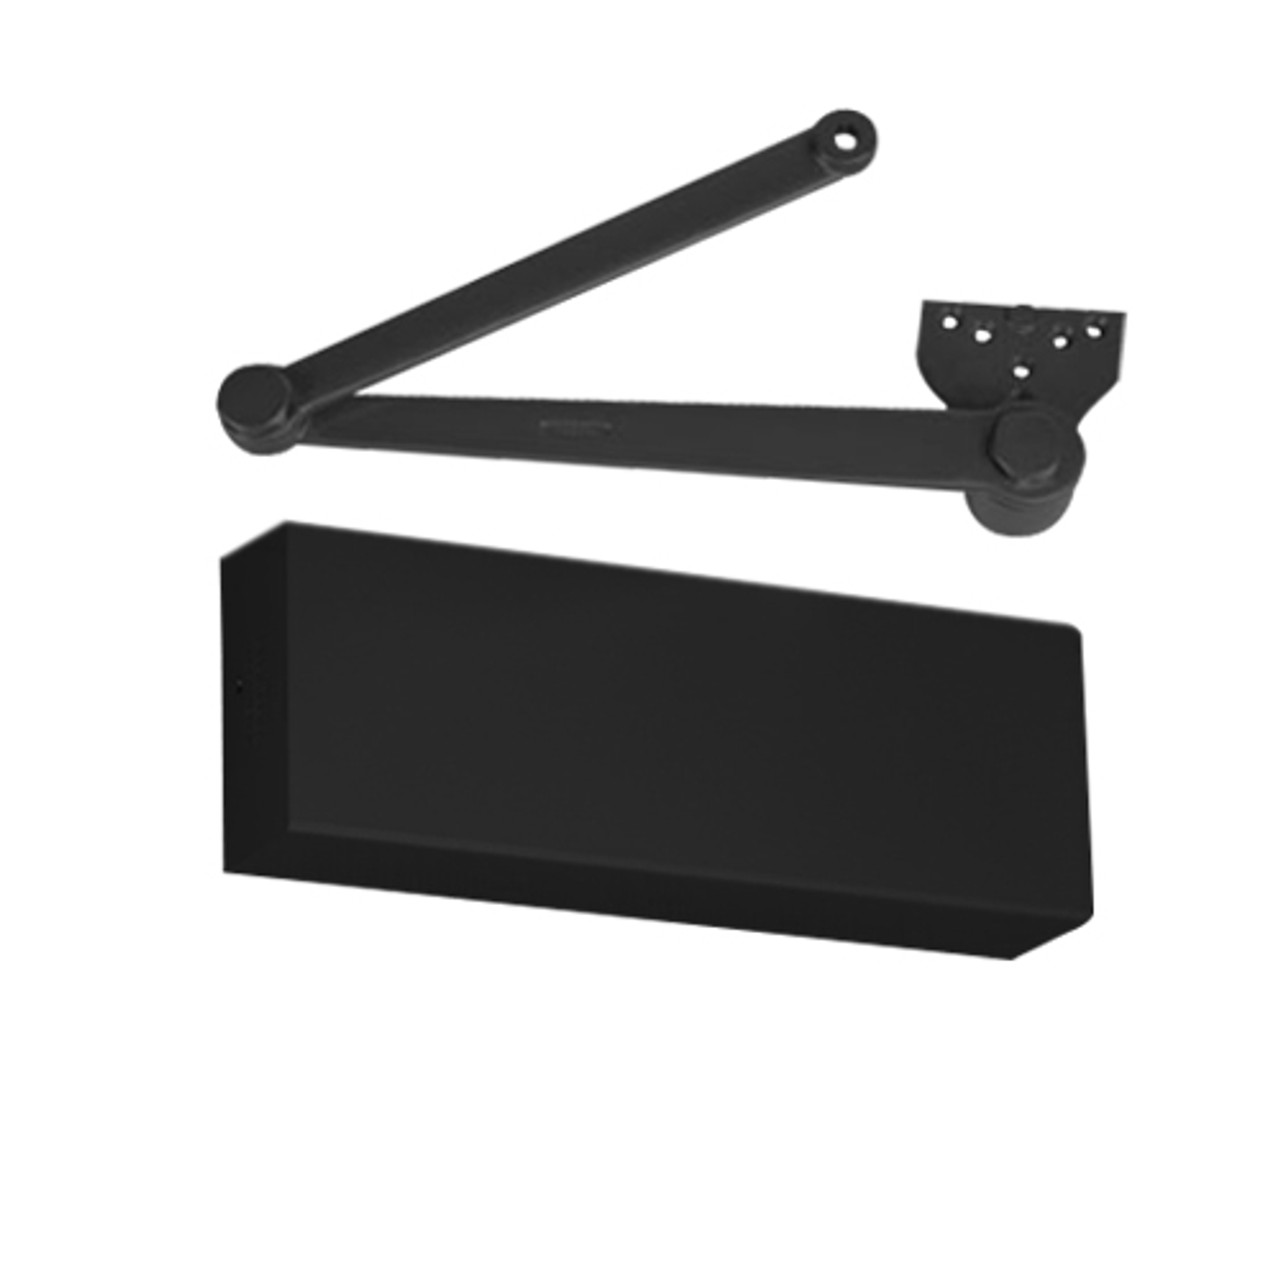 PRO9500HM-RH-693 Norton 9500 Series Hold Open Cast Iron Door Closer with Parallel Rigid Offset Arm in Black Finish